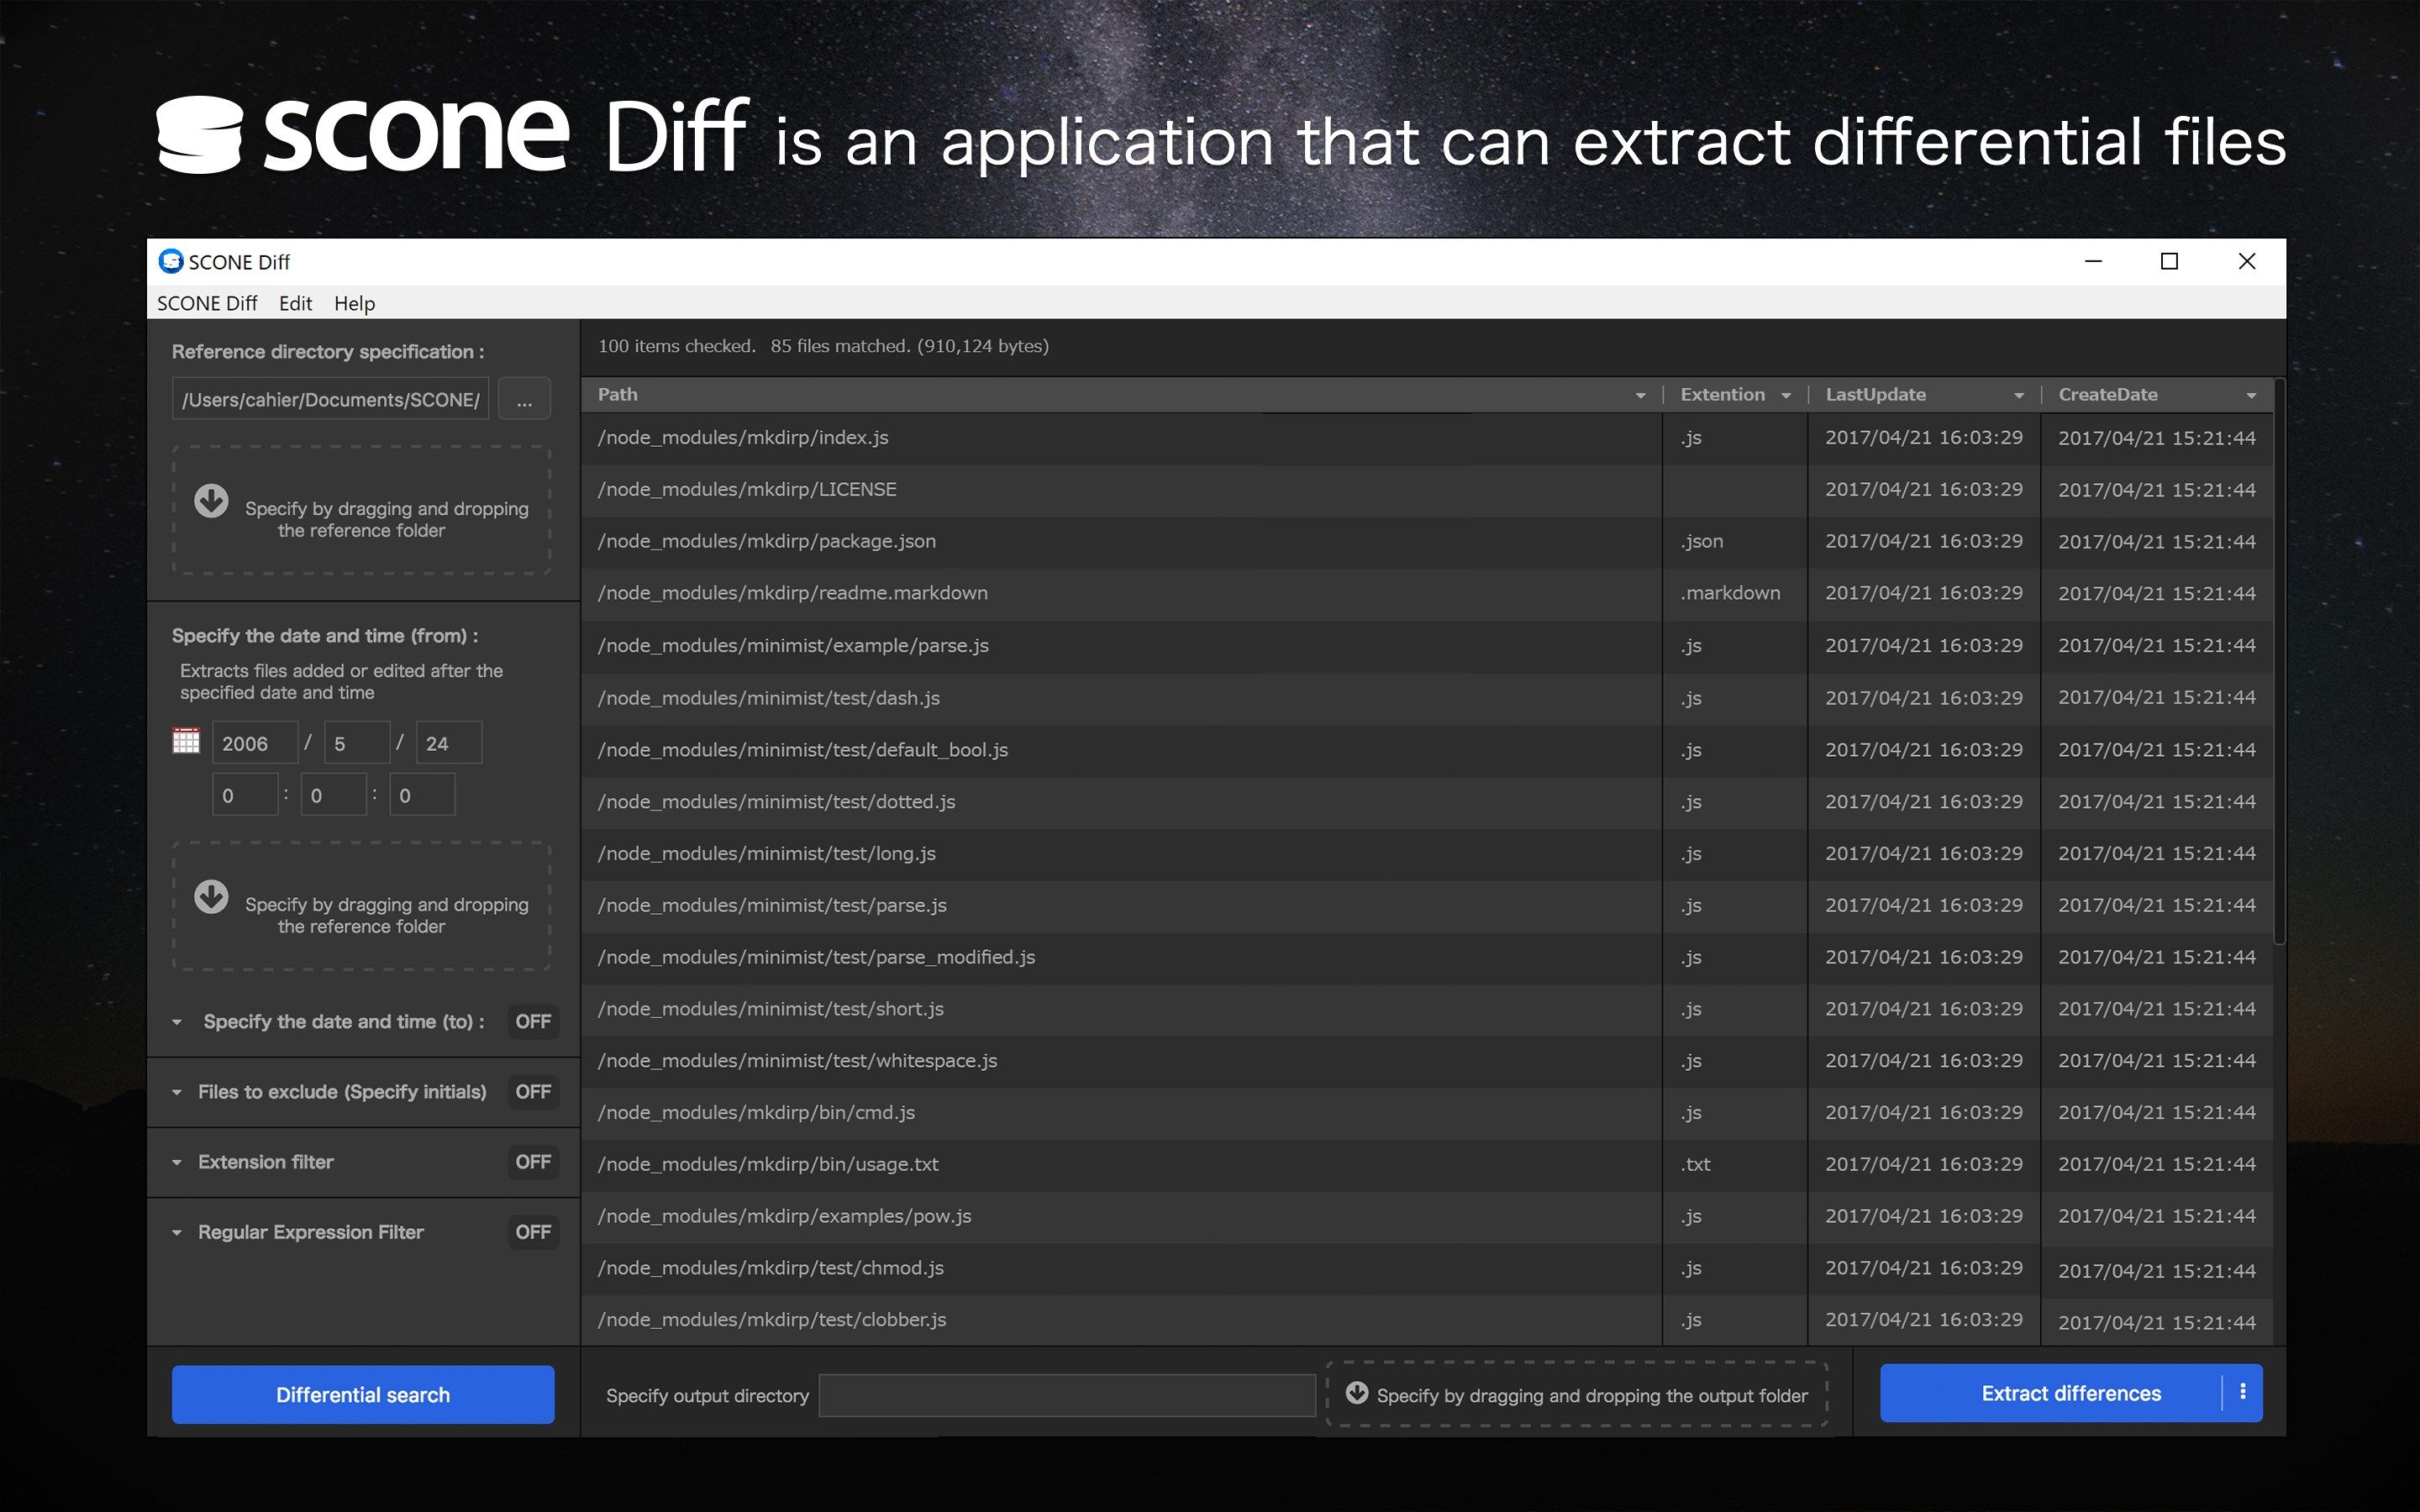 SCONE Diff Pro is an application that can extract differential files.